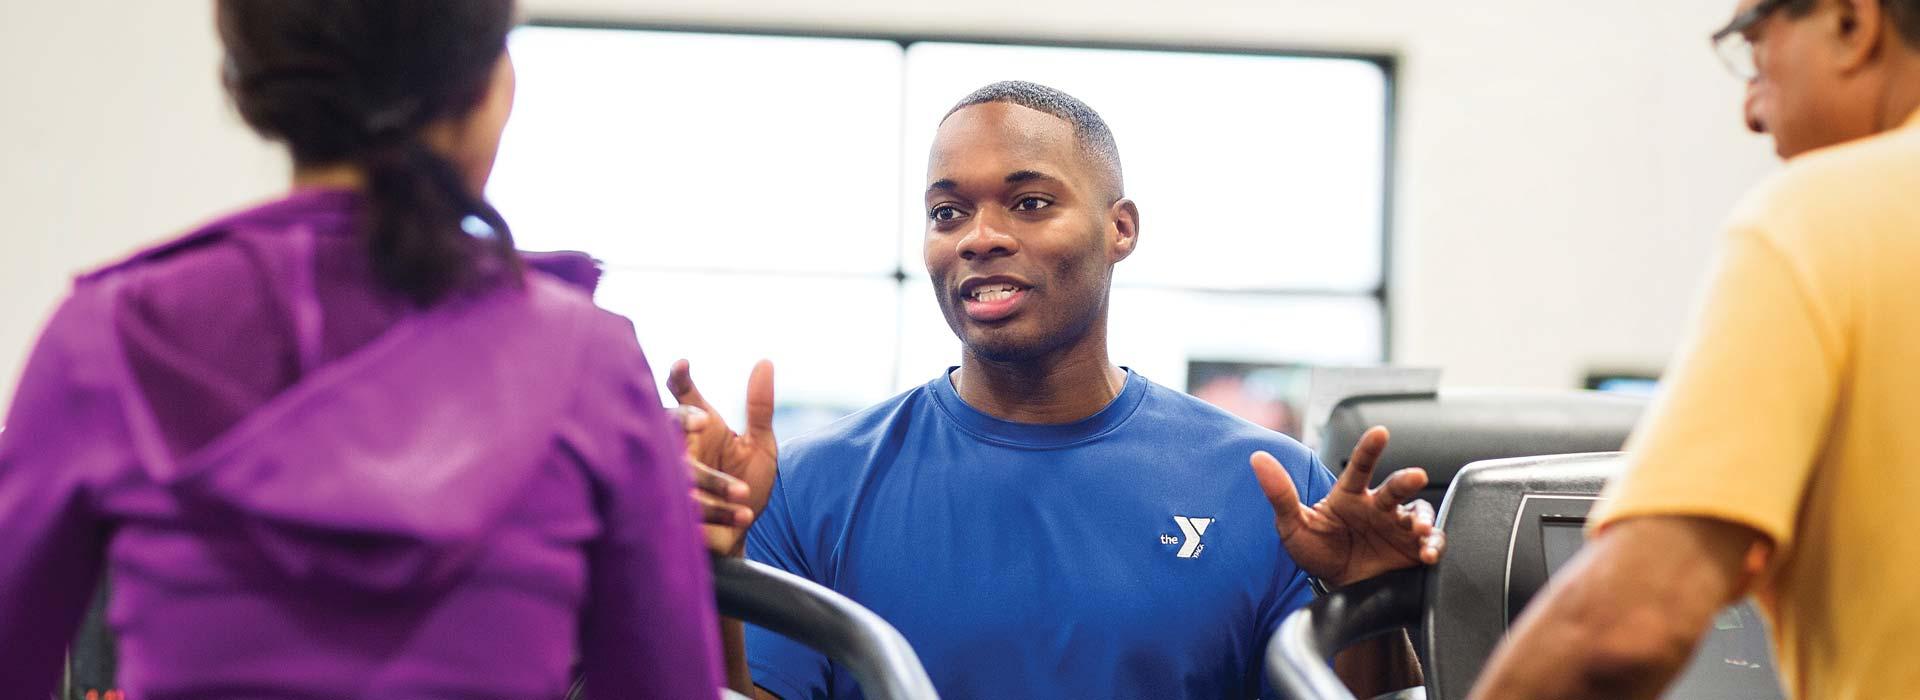 YMCA fitness staff person talks to two members using cardiovascular equipment in the Y's wellness center.